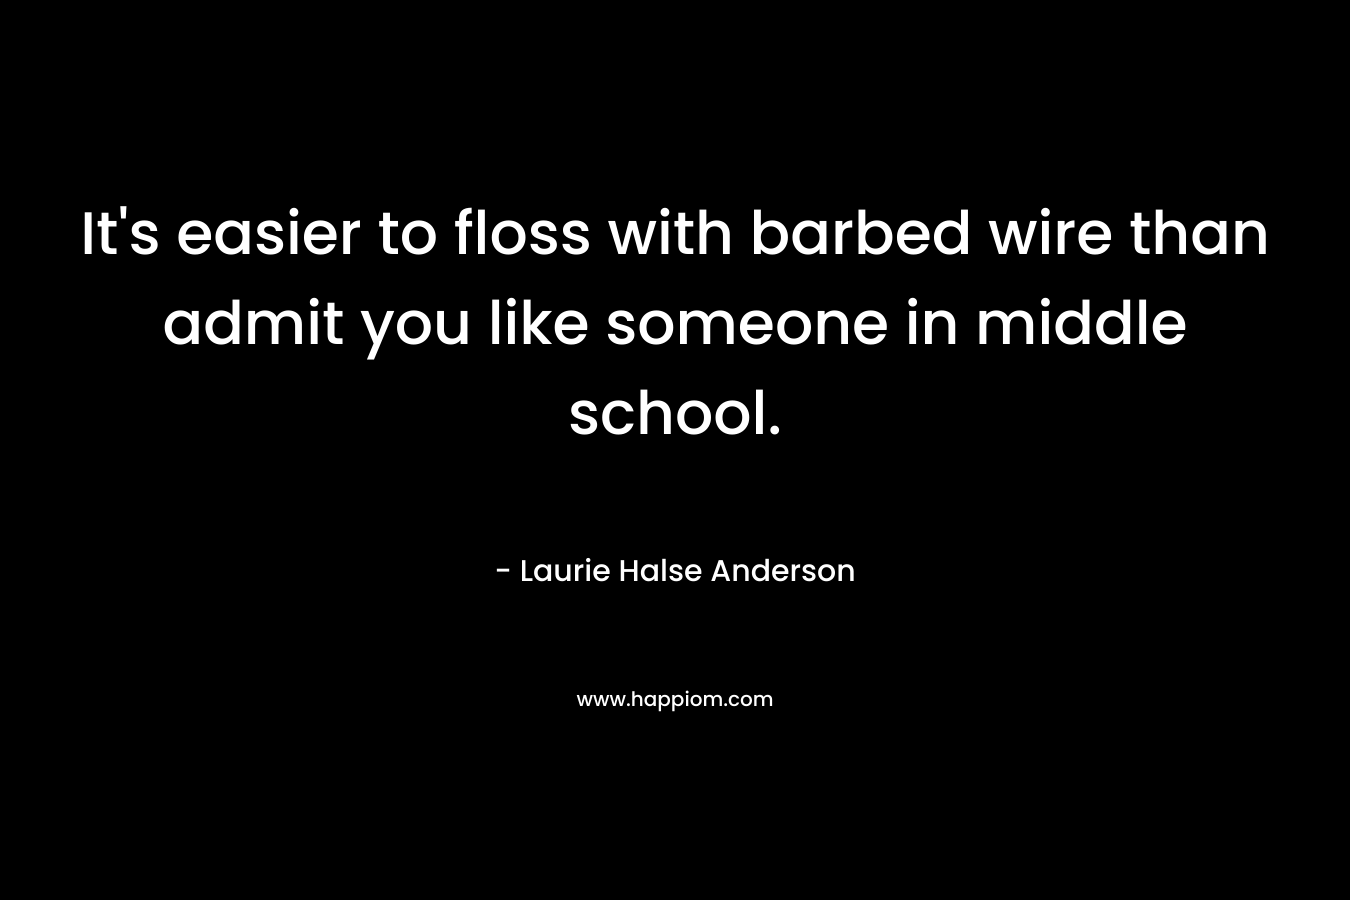 It’s easier to floss with barbed wire than admit you like someone in middle school. – Laurie Halse Anderson